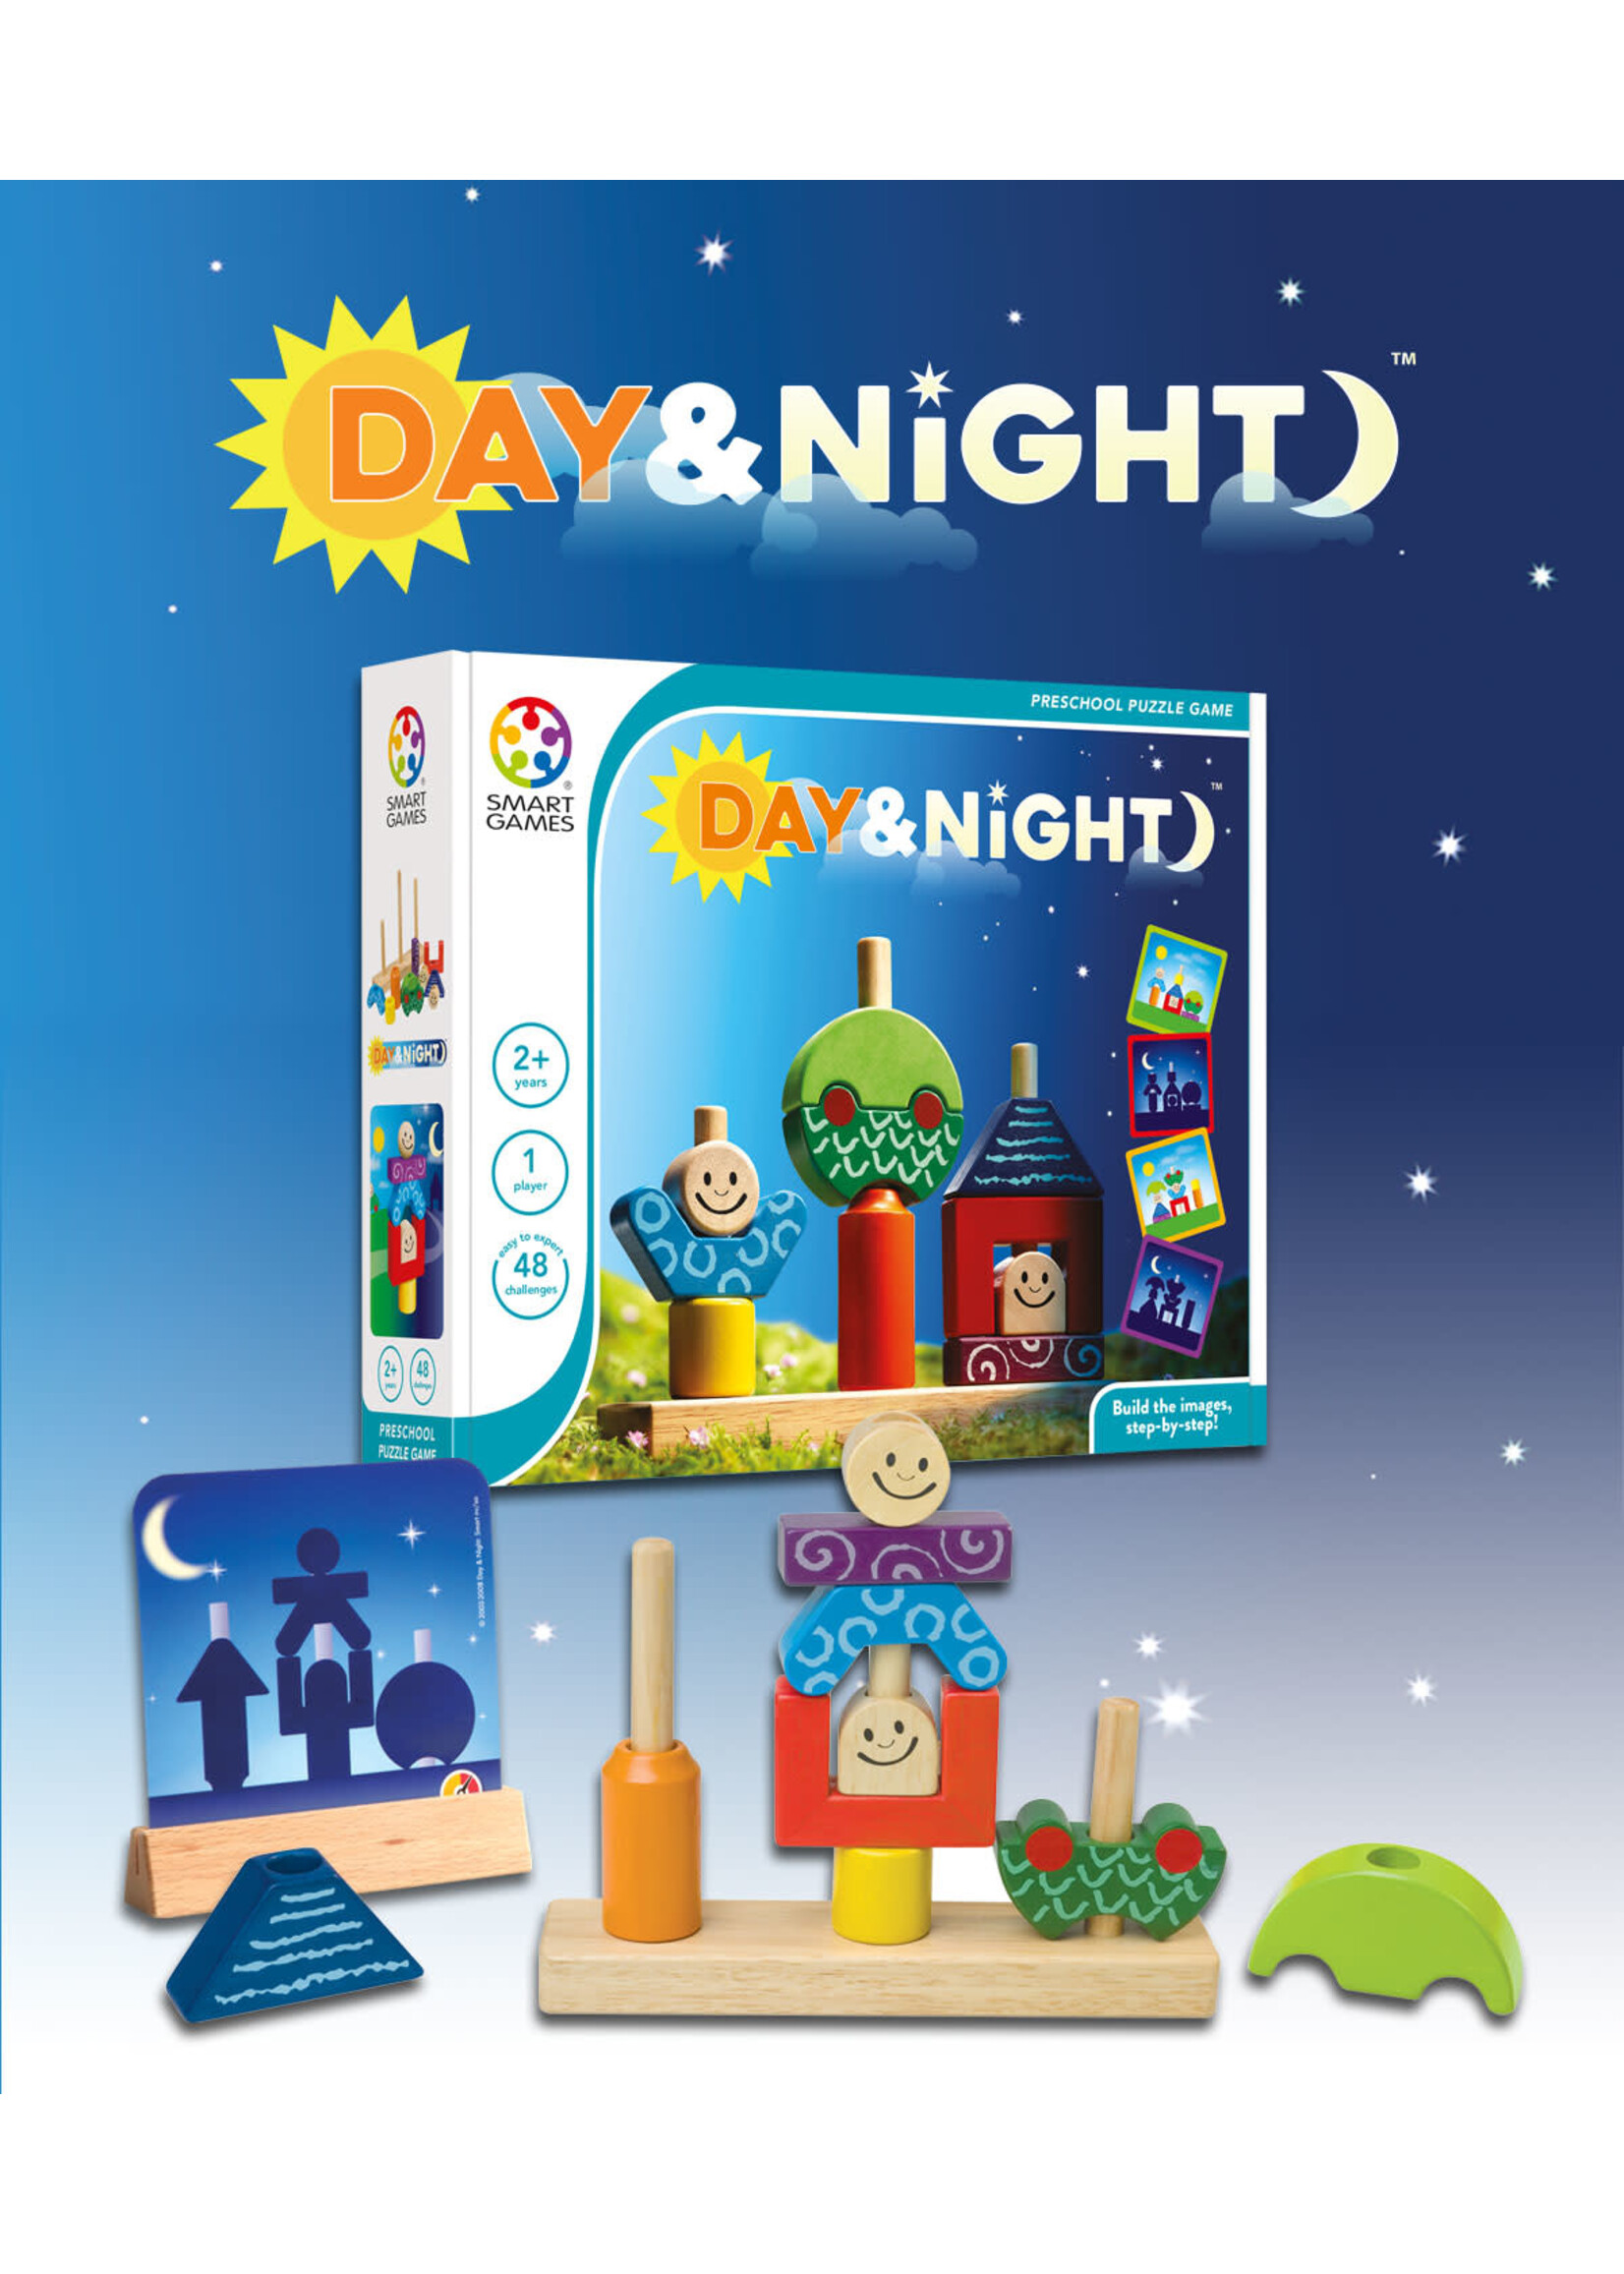 Smart games Day & night / Jour & nuit - Smart games